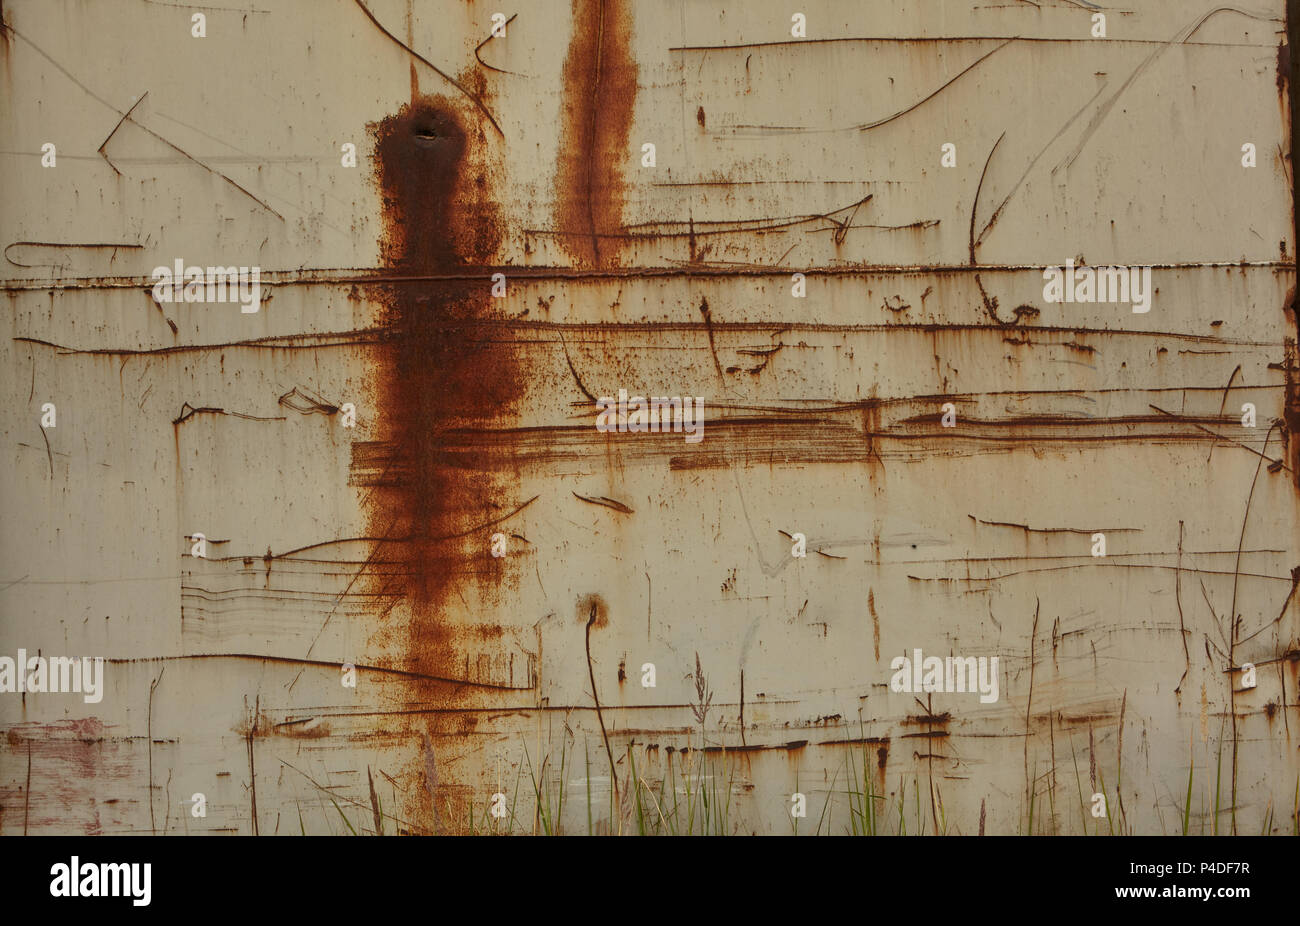 Abstract seamless texture of rusted metal. Old metal texture background. Stock Photo